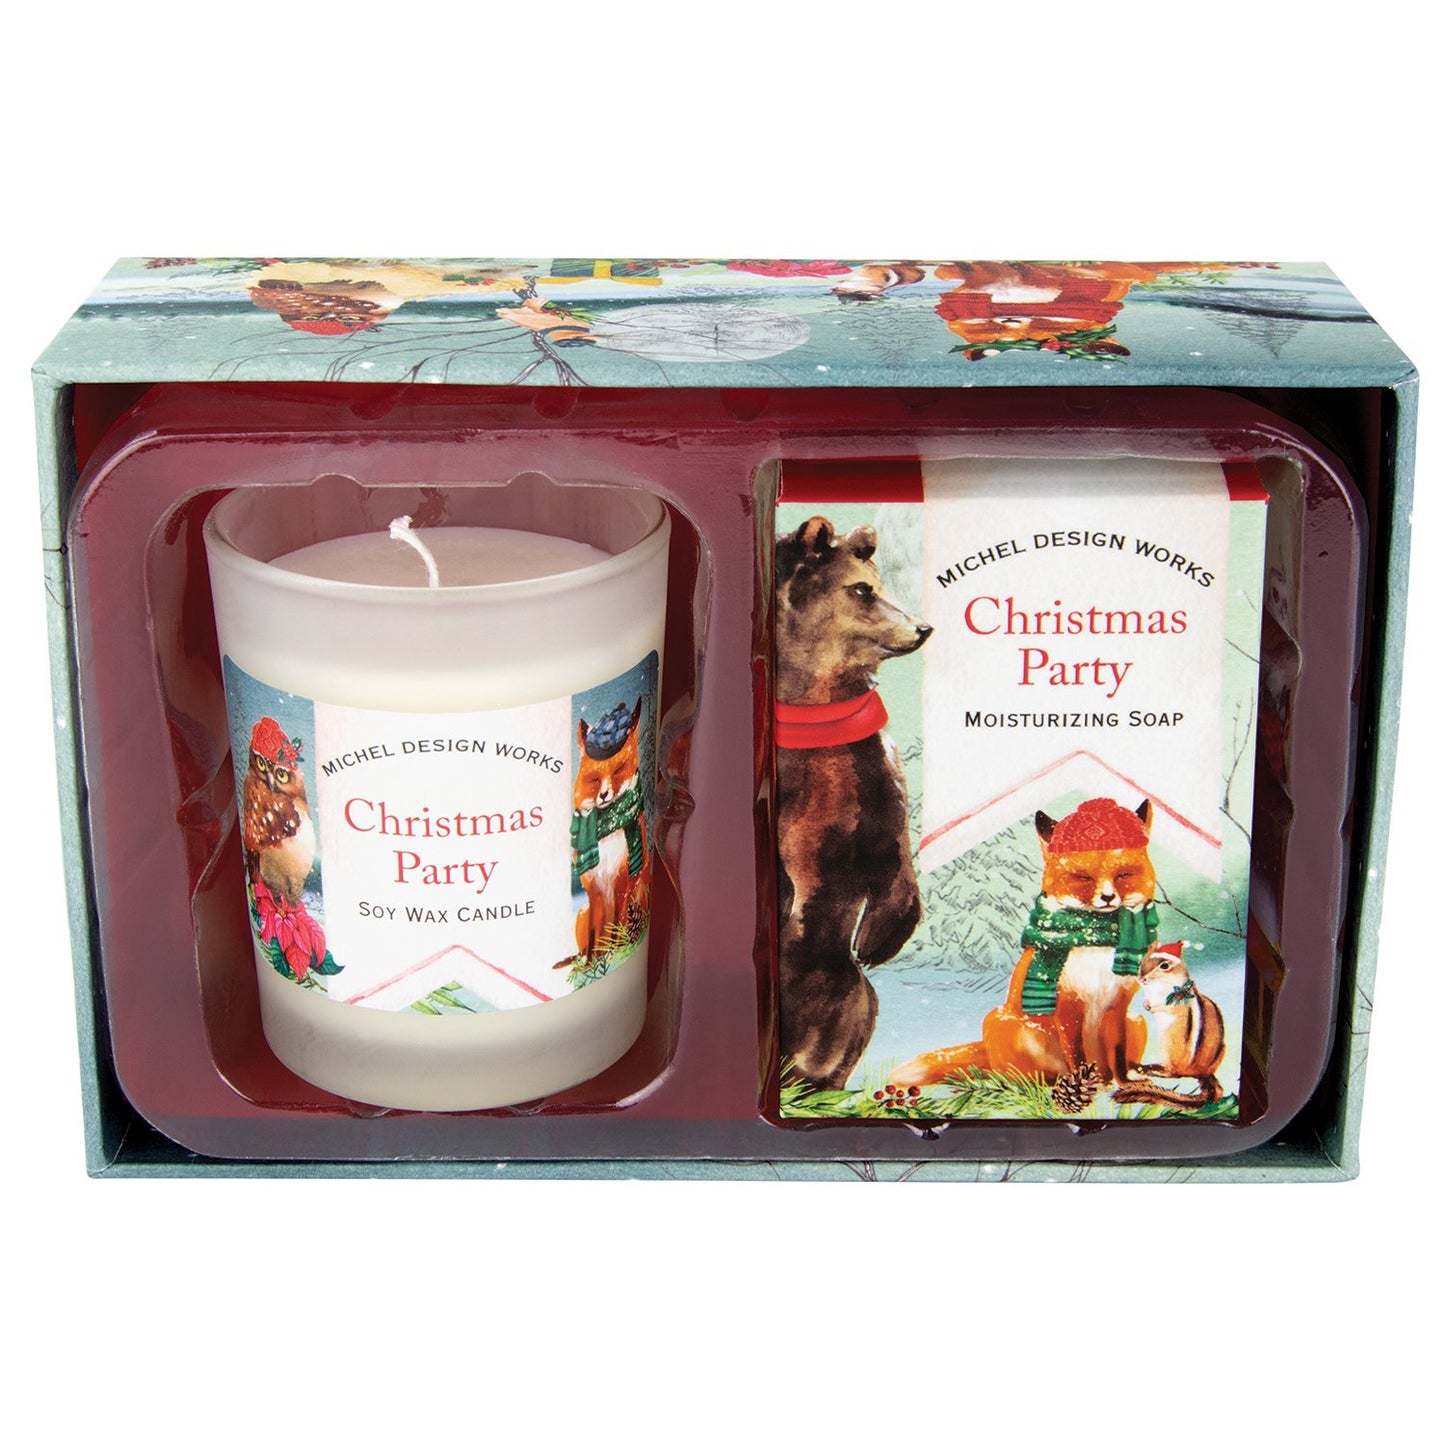 Michel Design Works Christmas Party Candle and Soap Gift Set